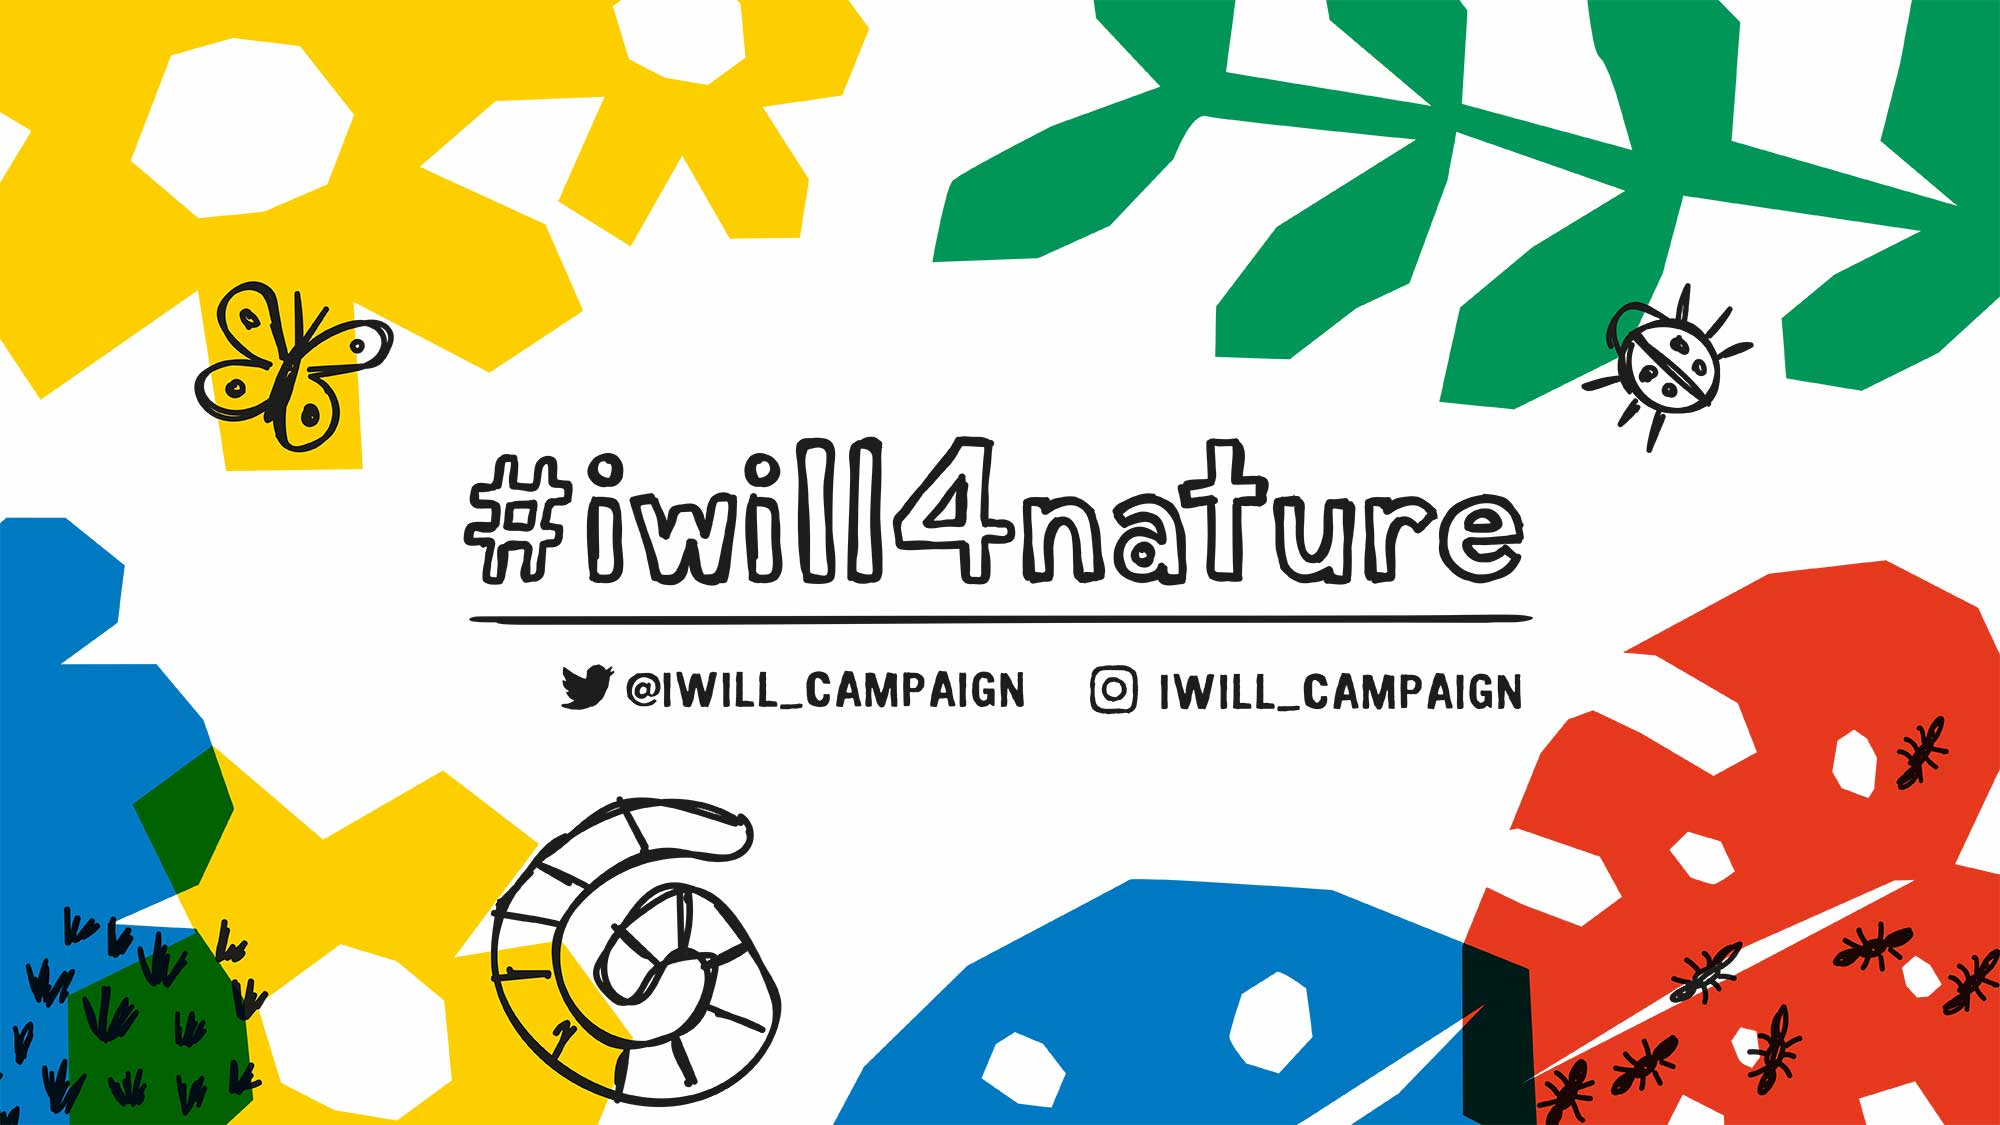 #iwill4nature